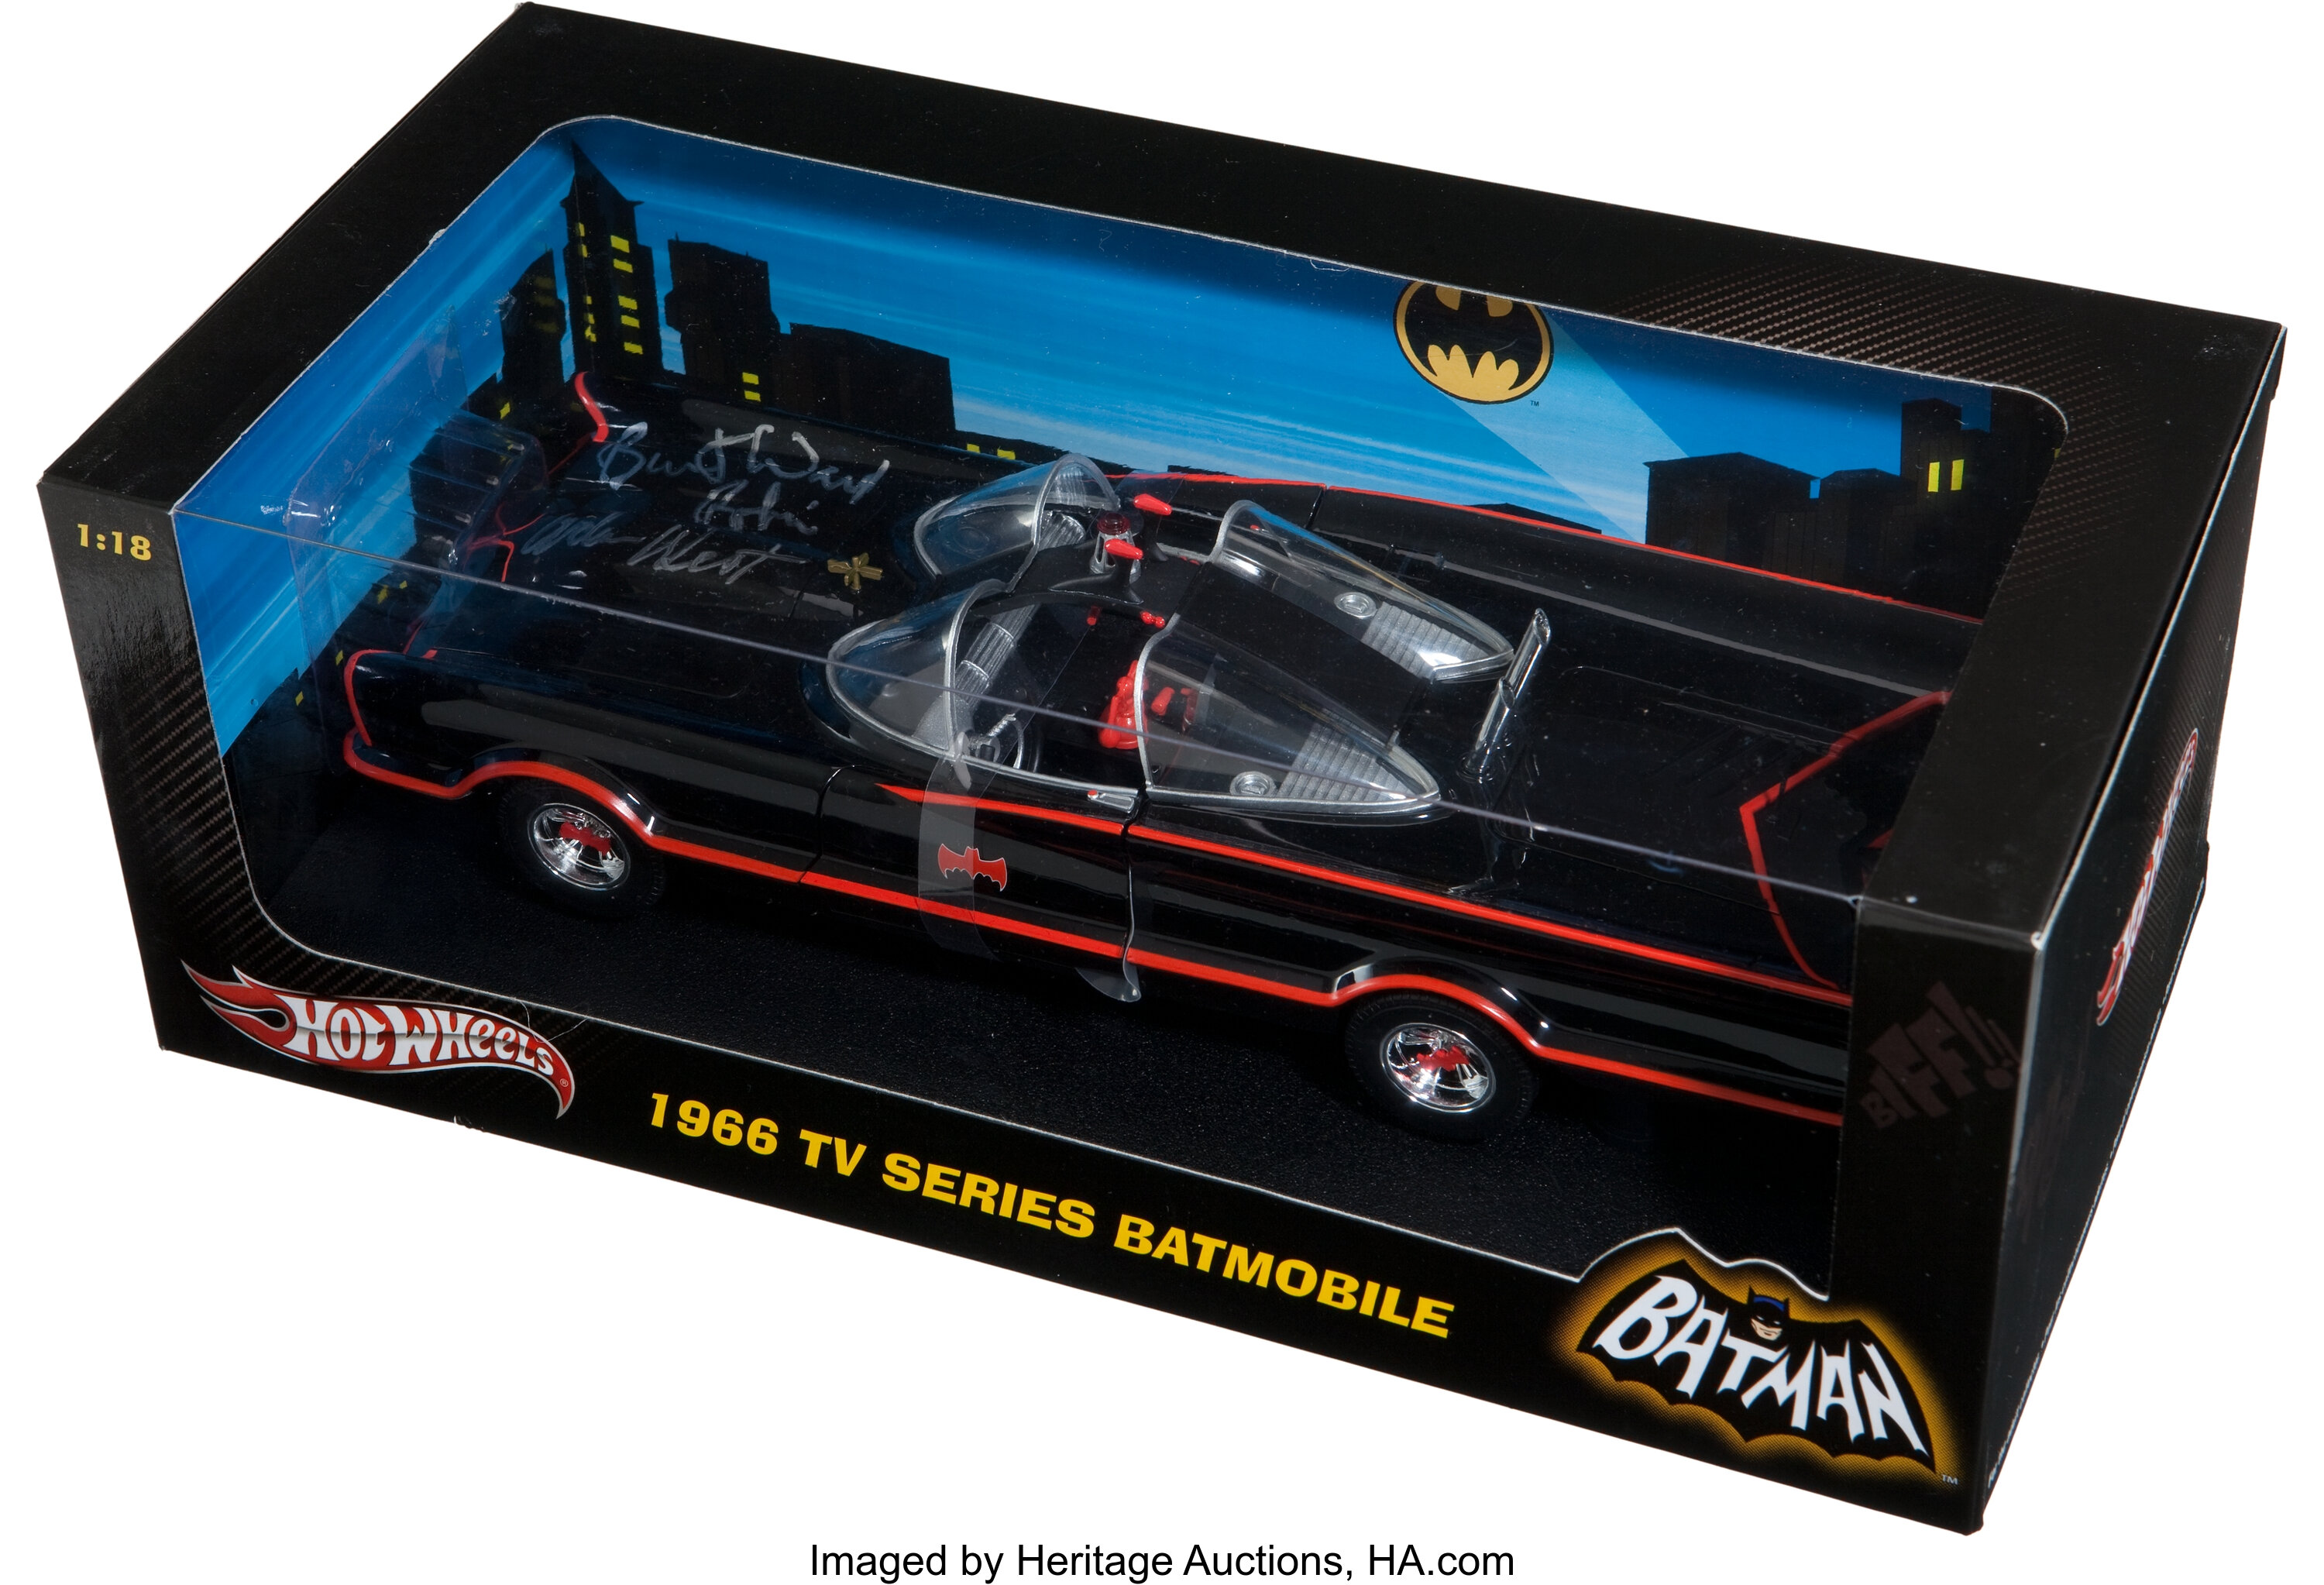 Batman Hot Wheels 1966 Series Batmobile Signed by Adam West and | Lot  #14587 | Heritage Auctions